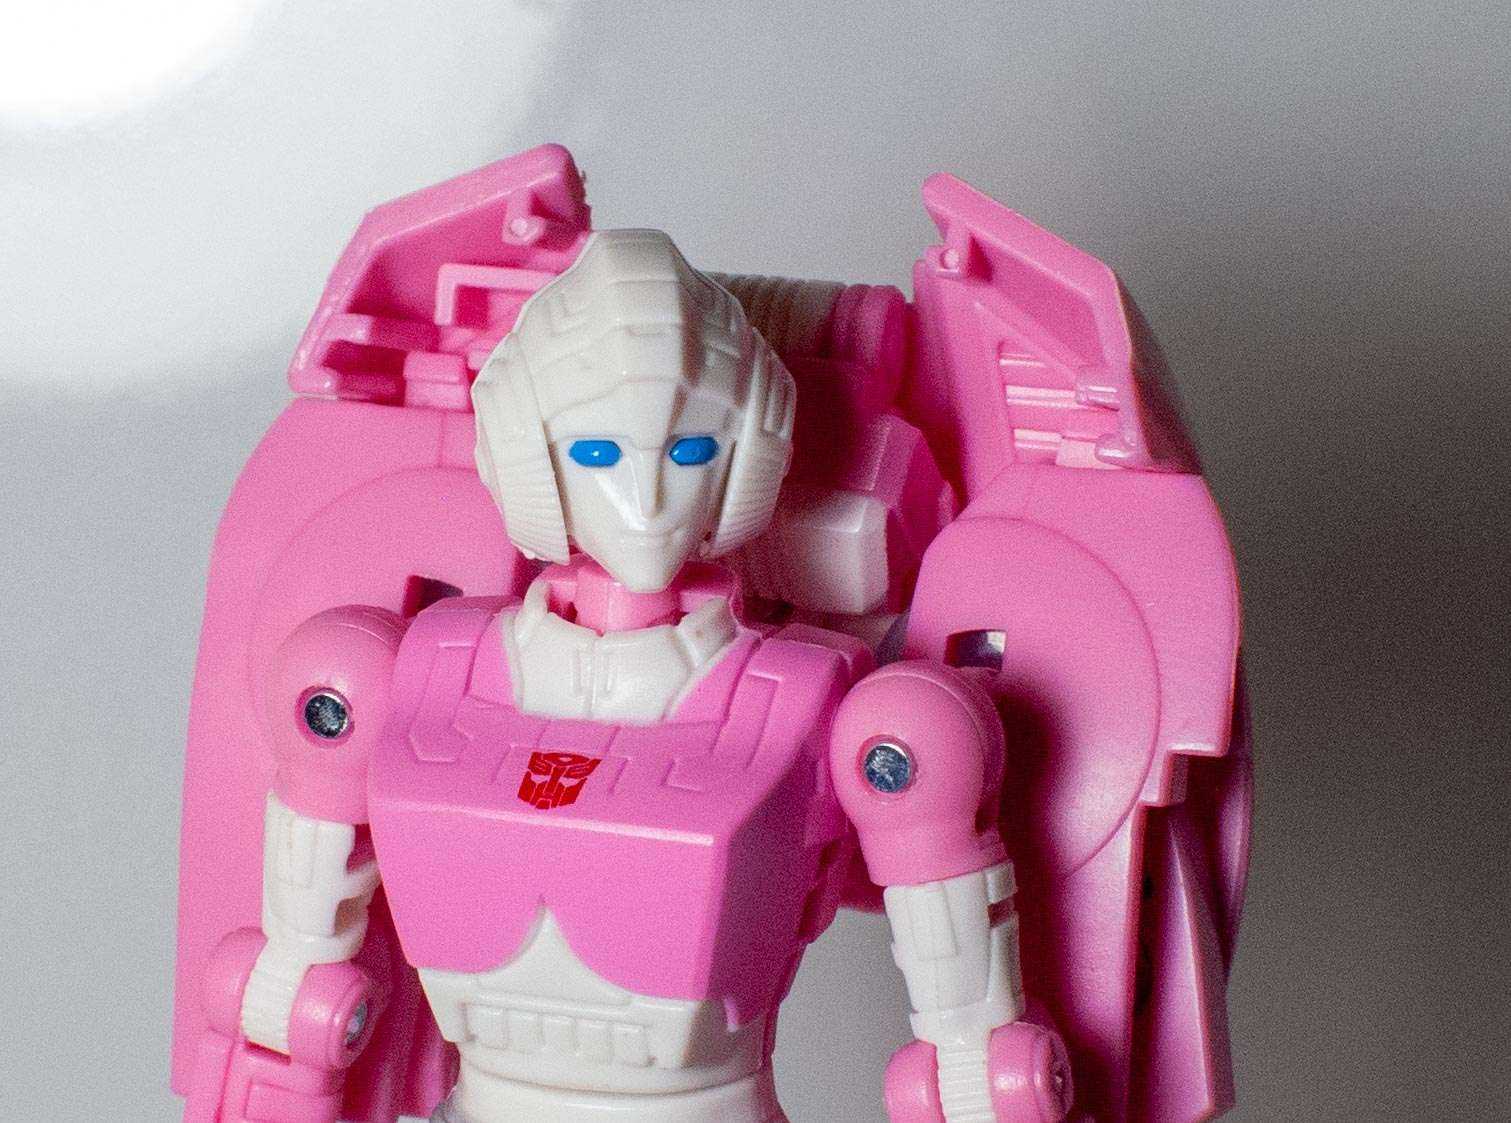 Arcee Female Transformer car action figure toy model robot shooter autobot Pink 